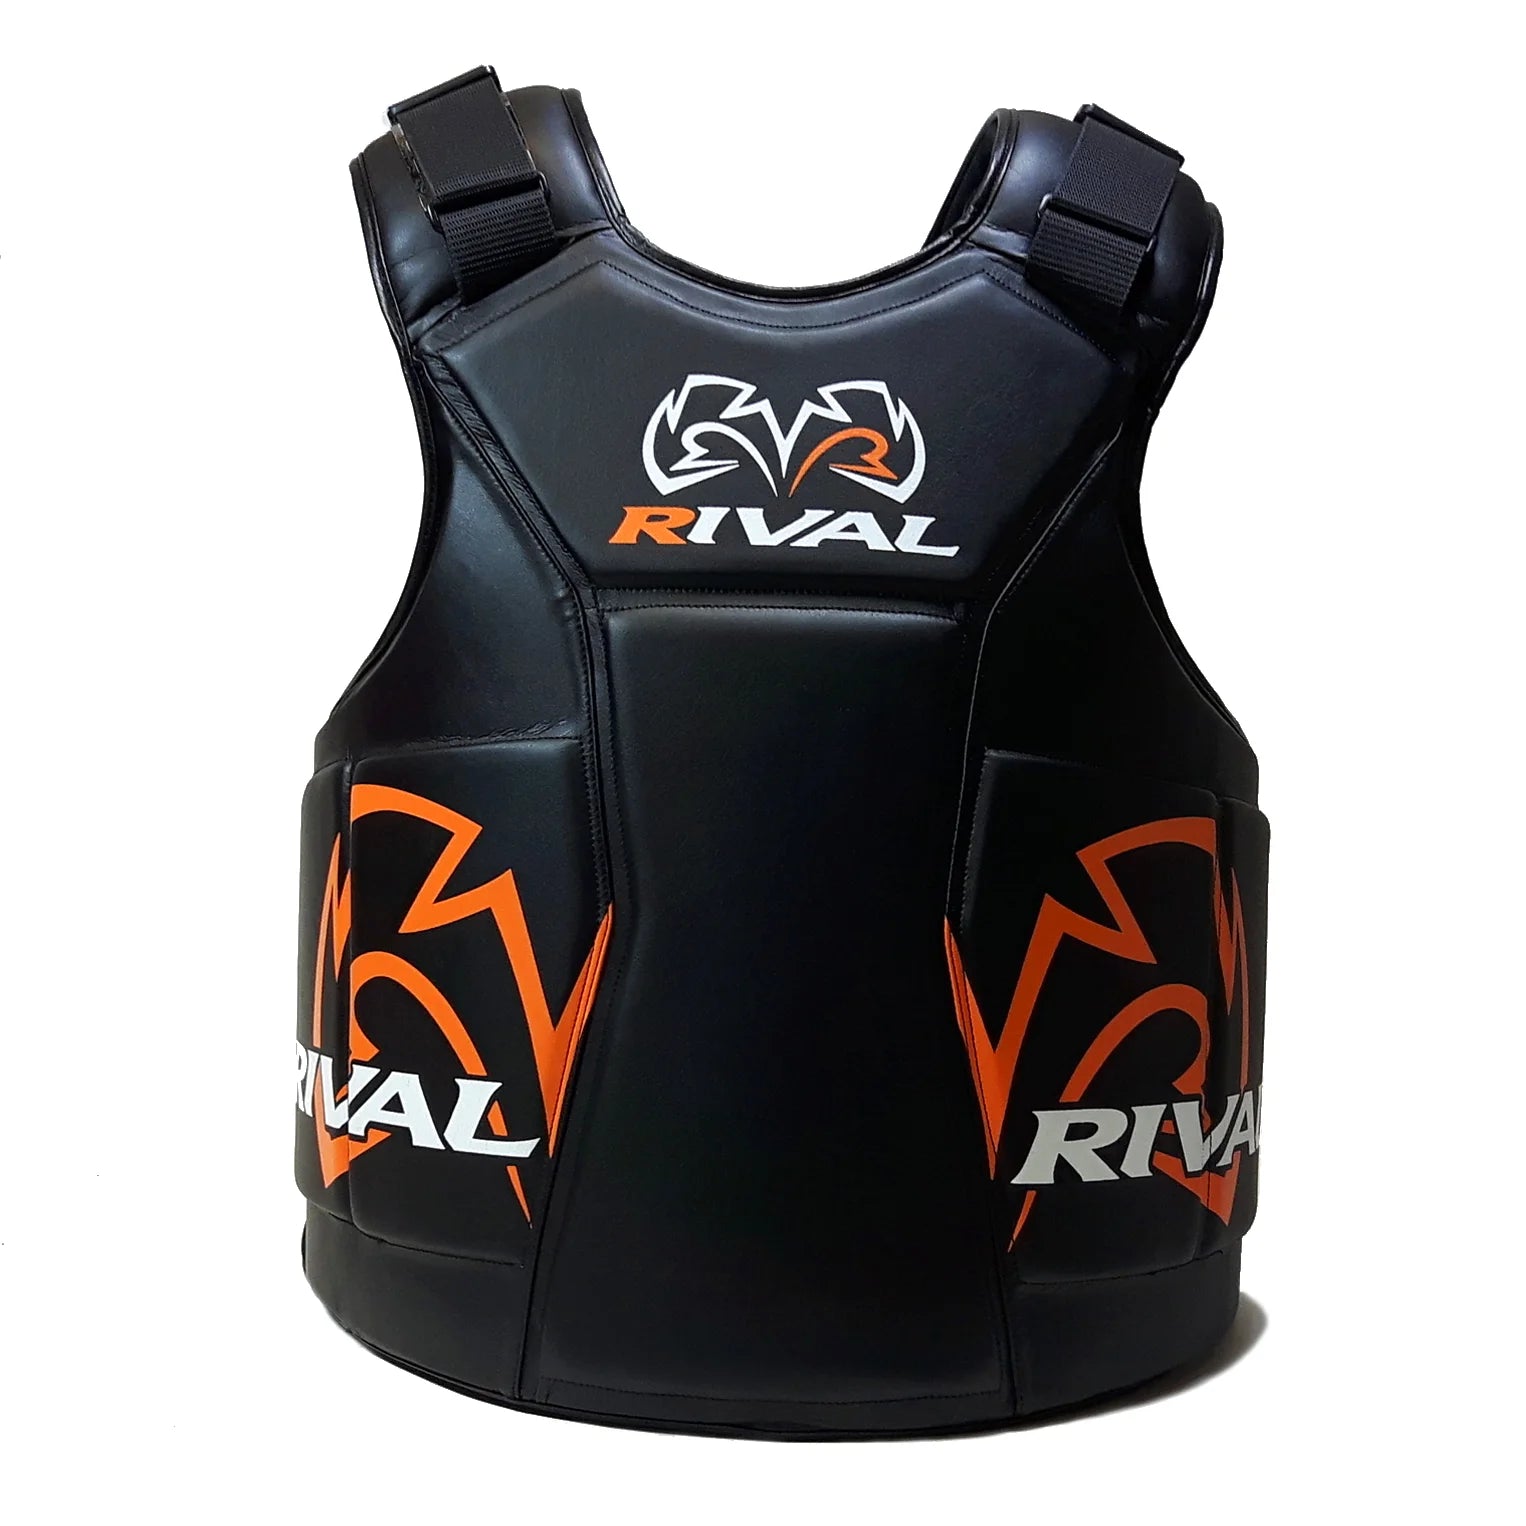 Dainese Rival Chest Guard Protector Vest - Upper Body Protectors